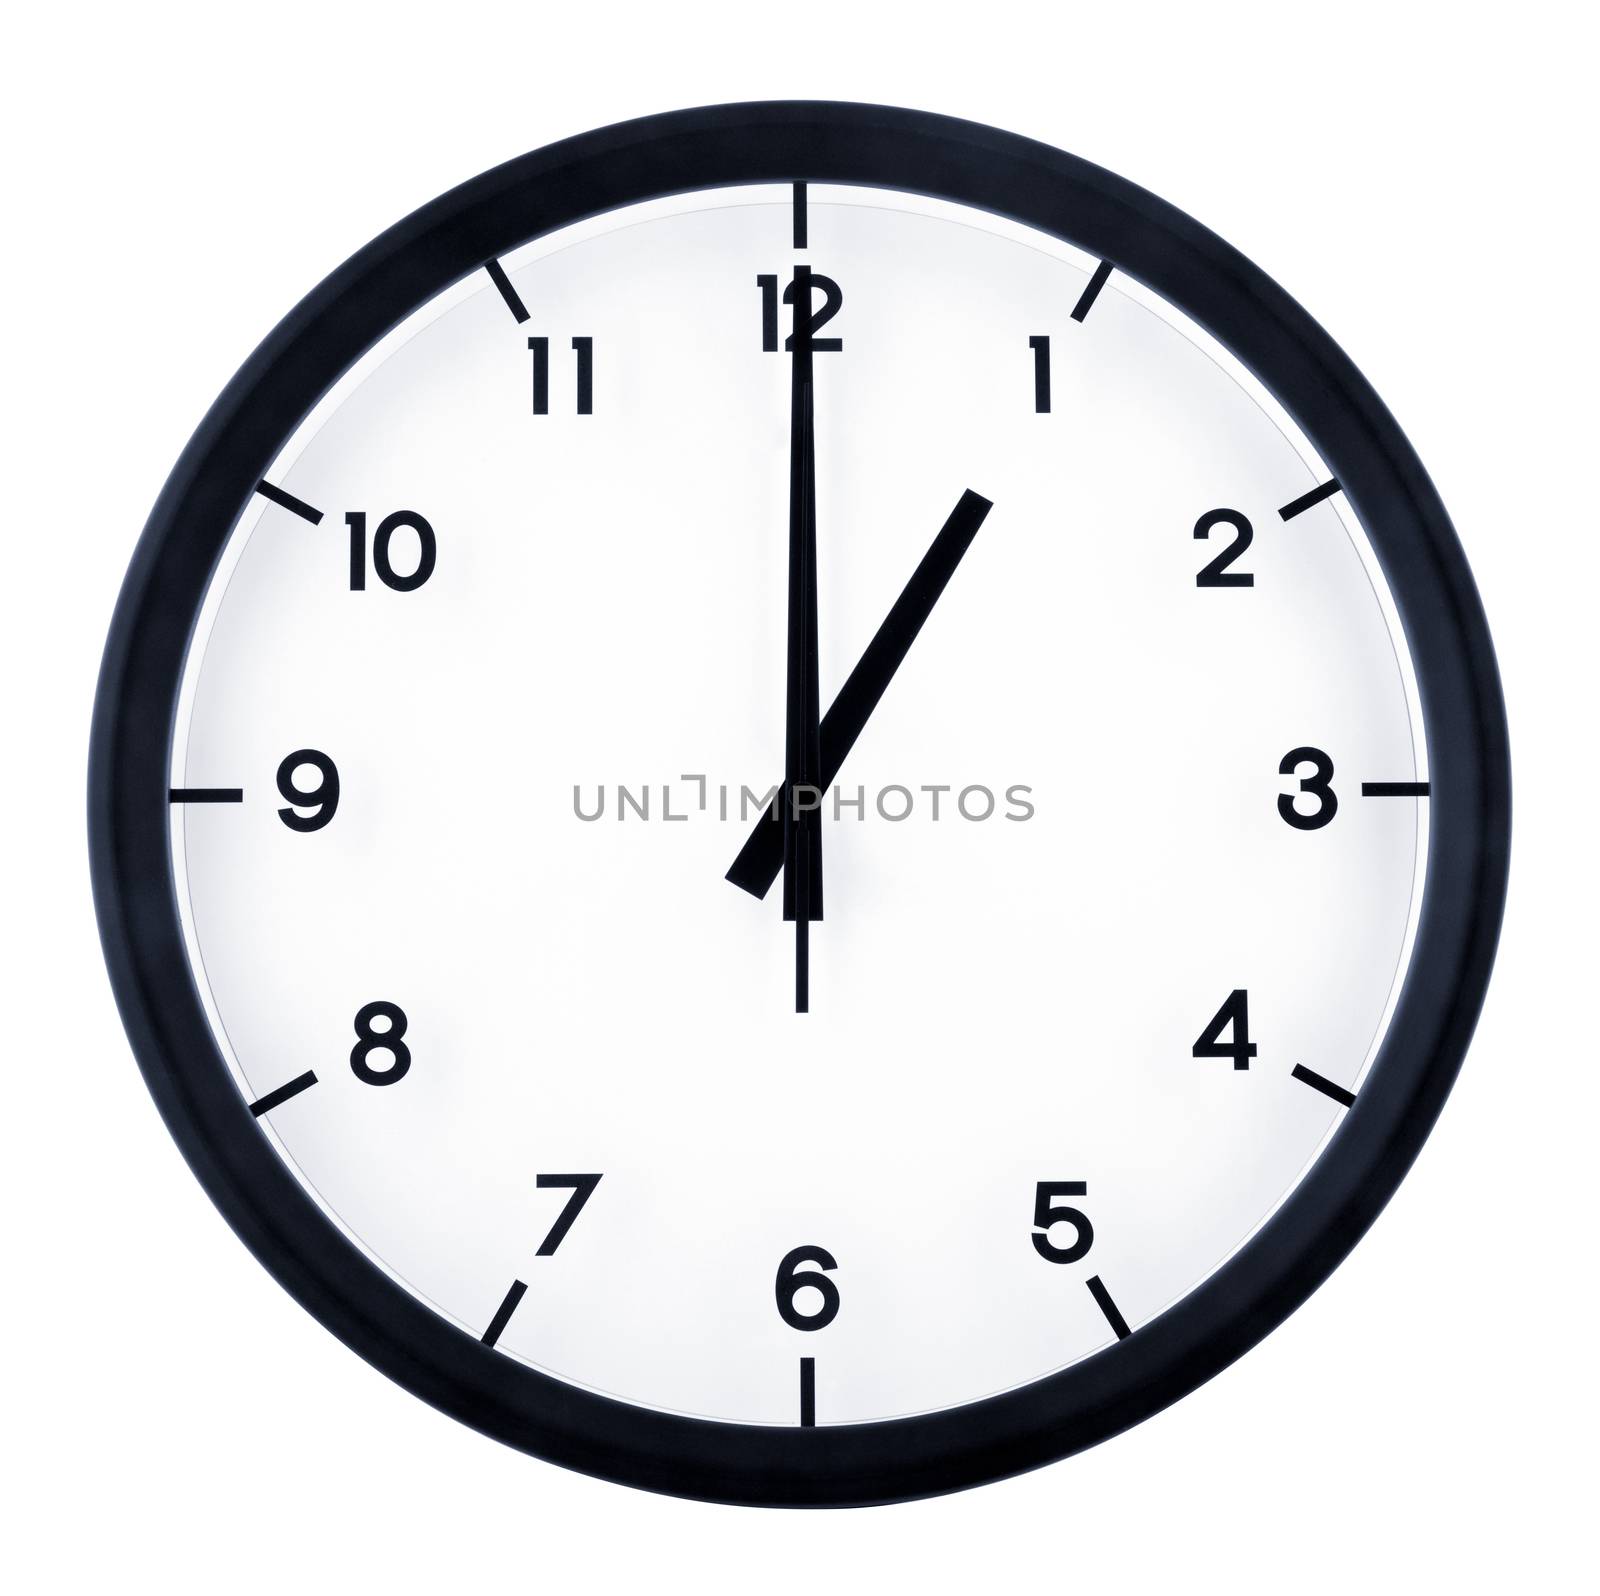 Classic analog clock pointing at 1 o'clock, isolated on white background